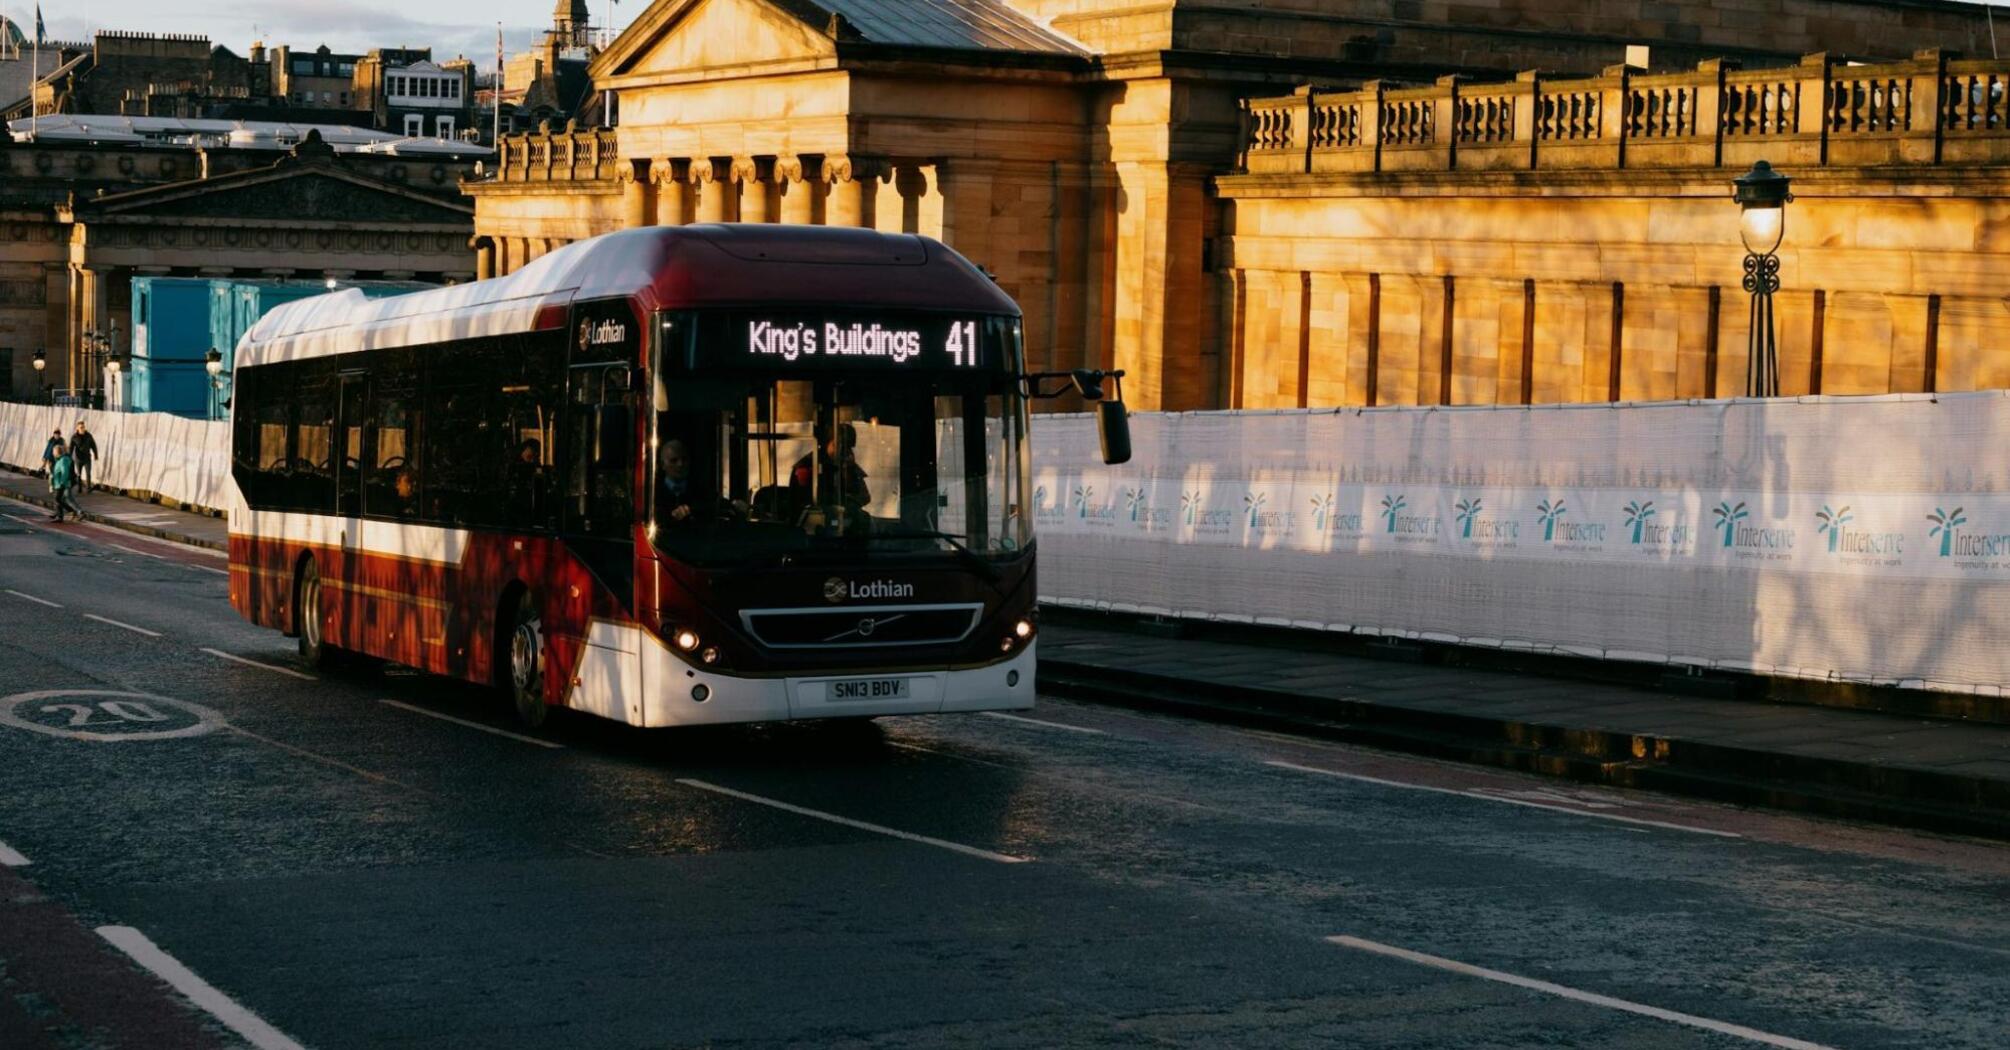 A Lothian bus driving through Edinburgh, with historical architecture in the background